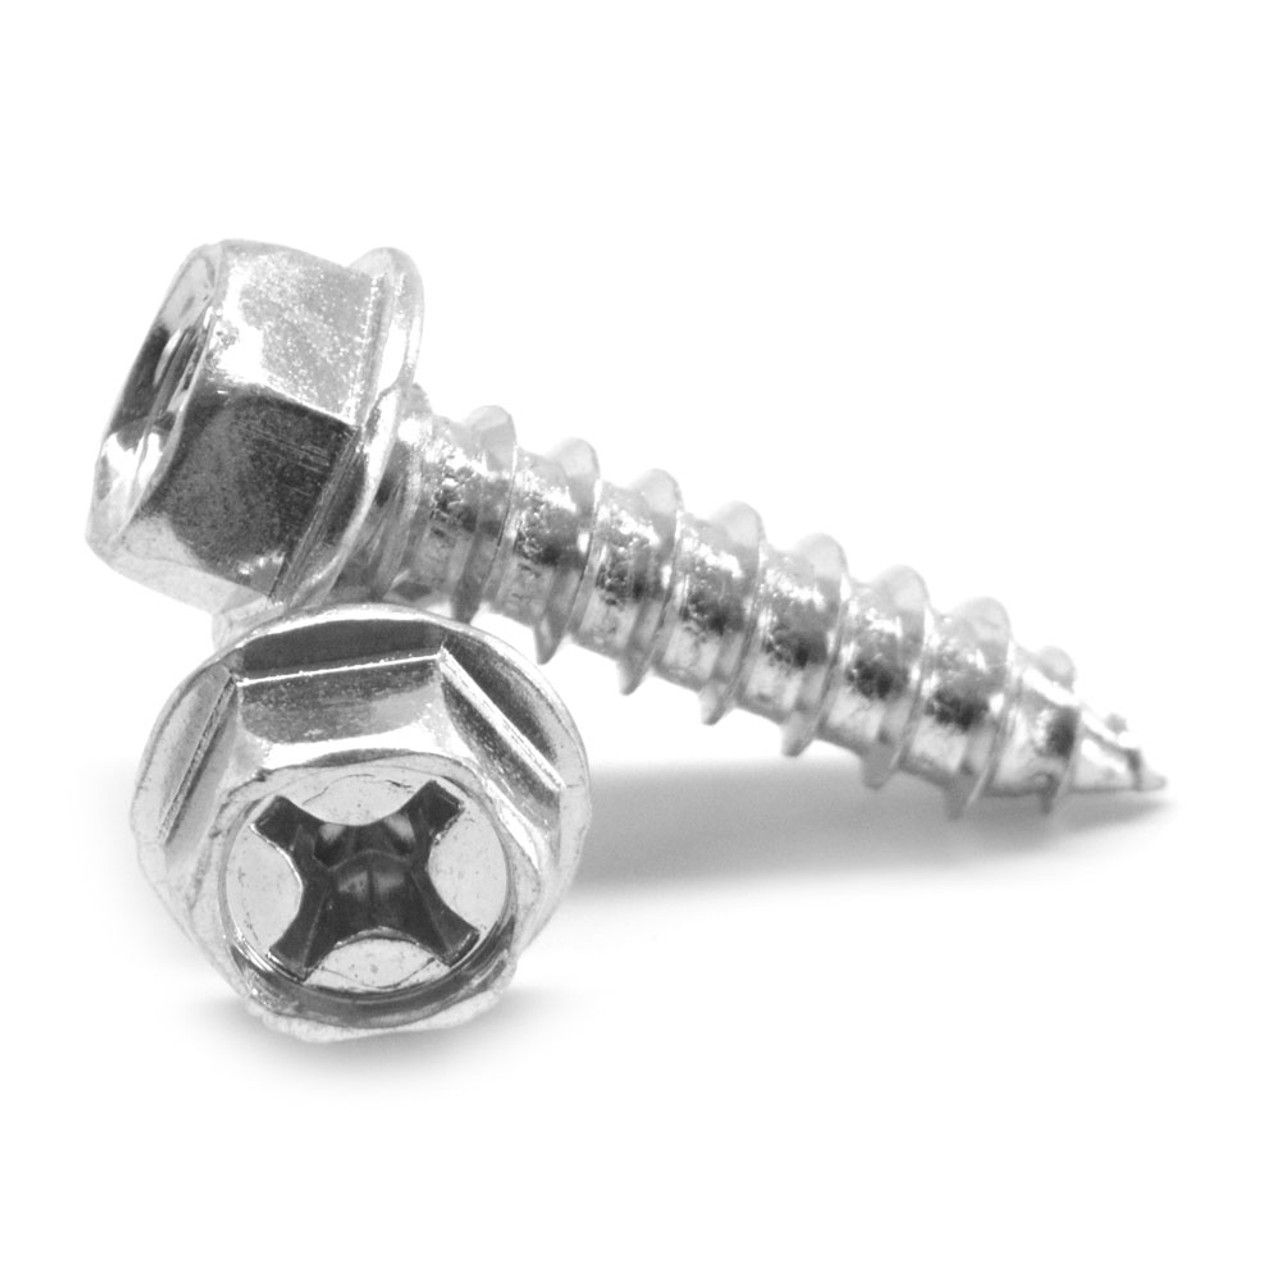 Screws in inches UNC hex head quick delivery with SDA 